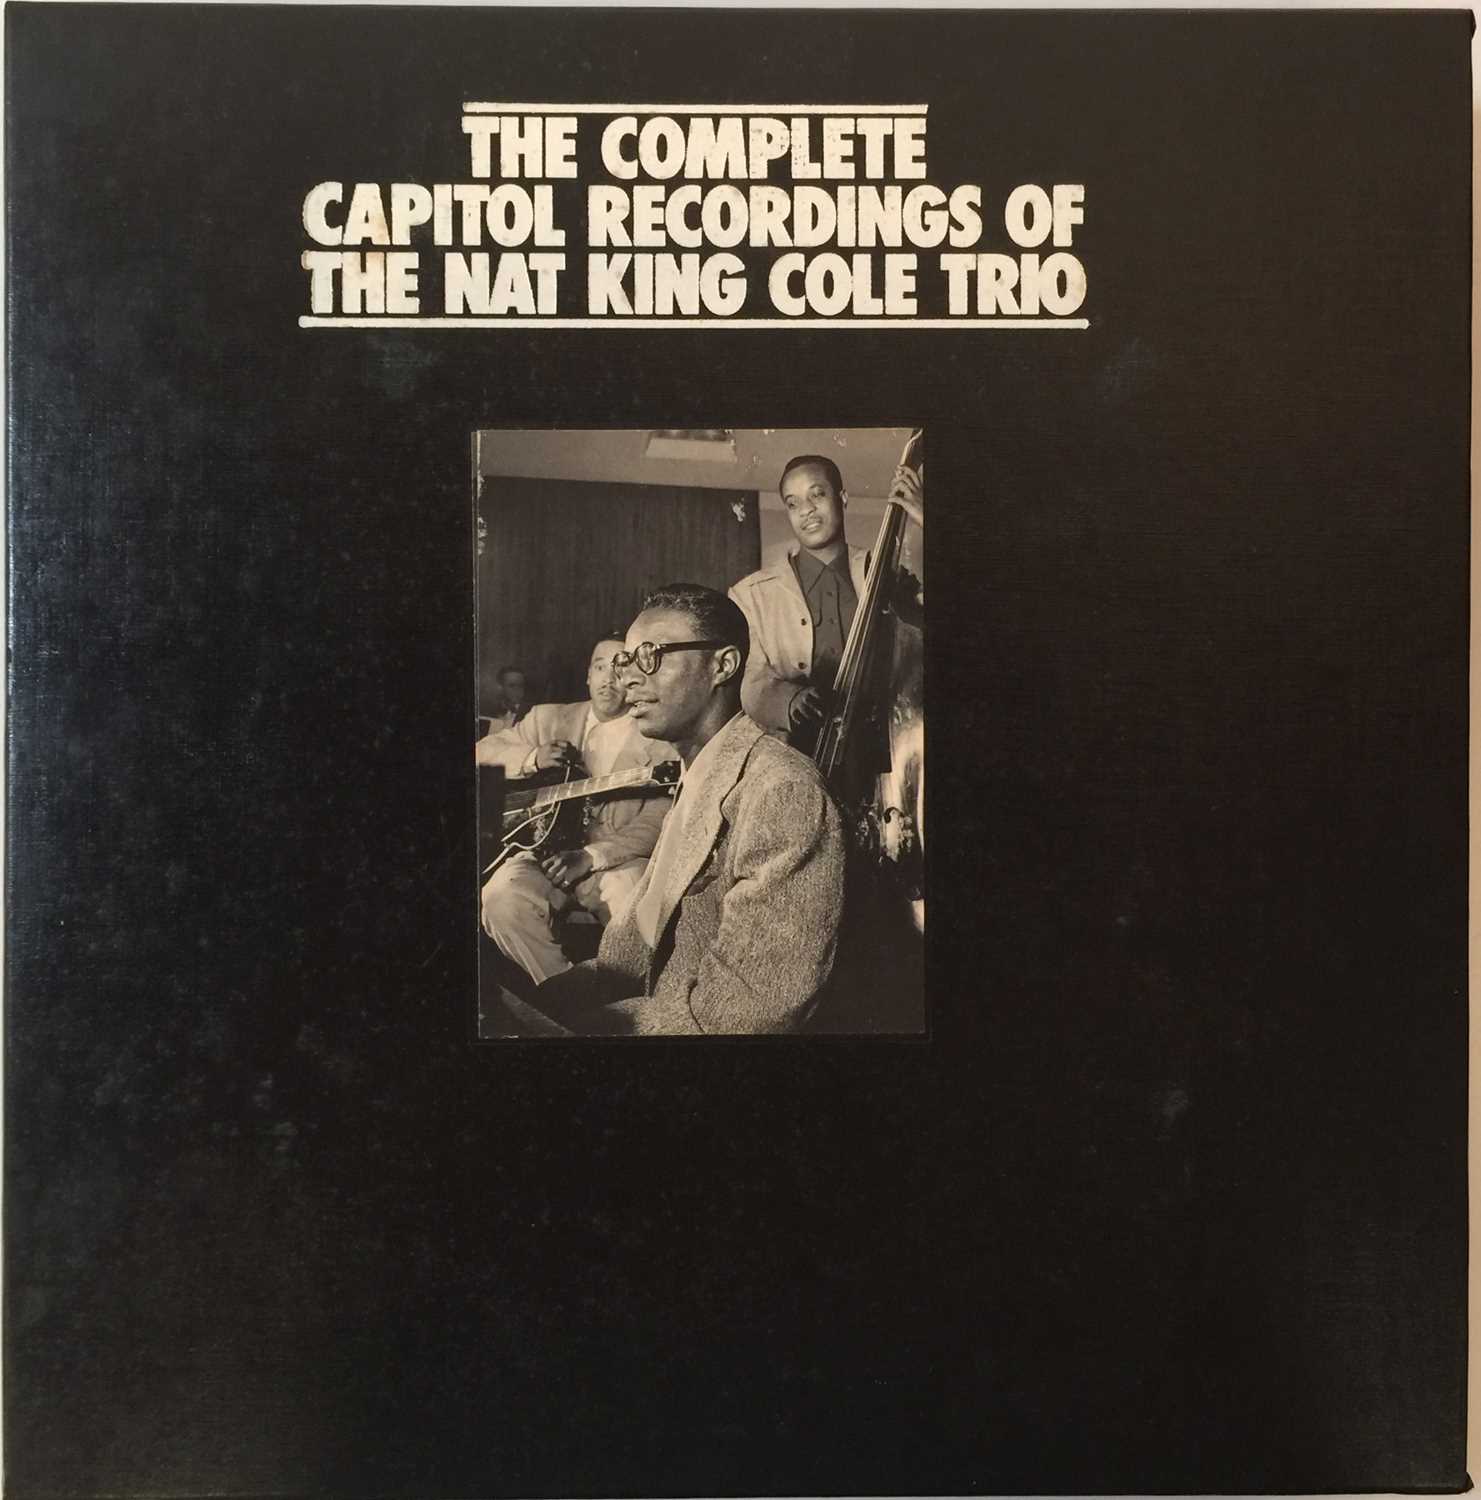 Lot 44 - NAT KING COLE TRIO - THE COMPLETE CAPITOL RECORDINGS OF (MOSAIC 18 CD SET - 138)